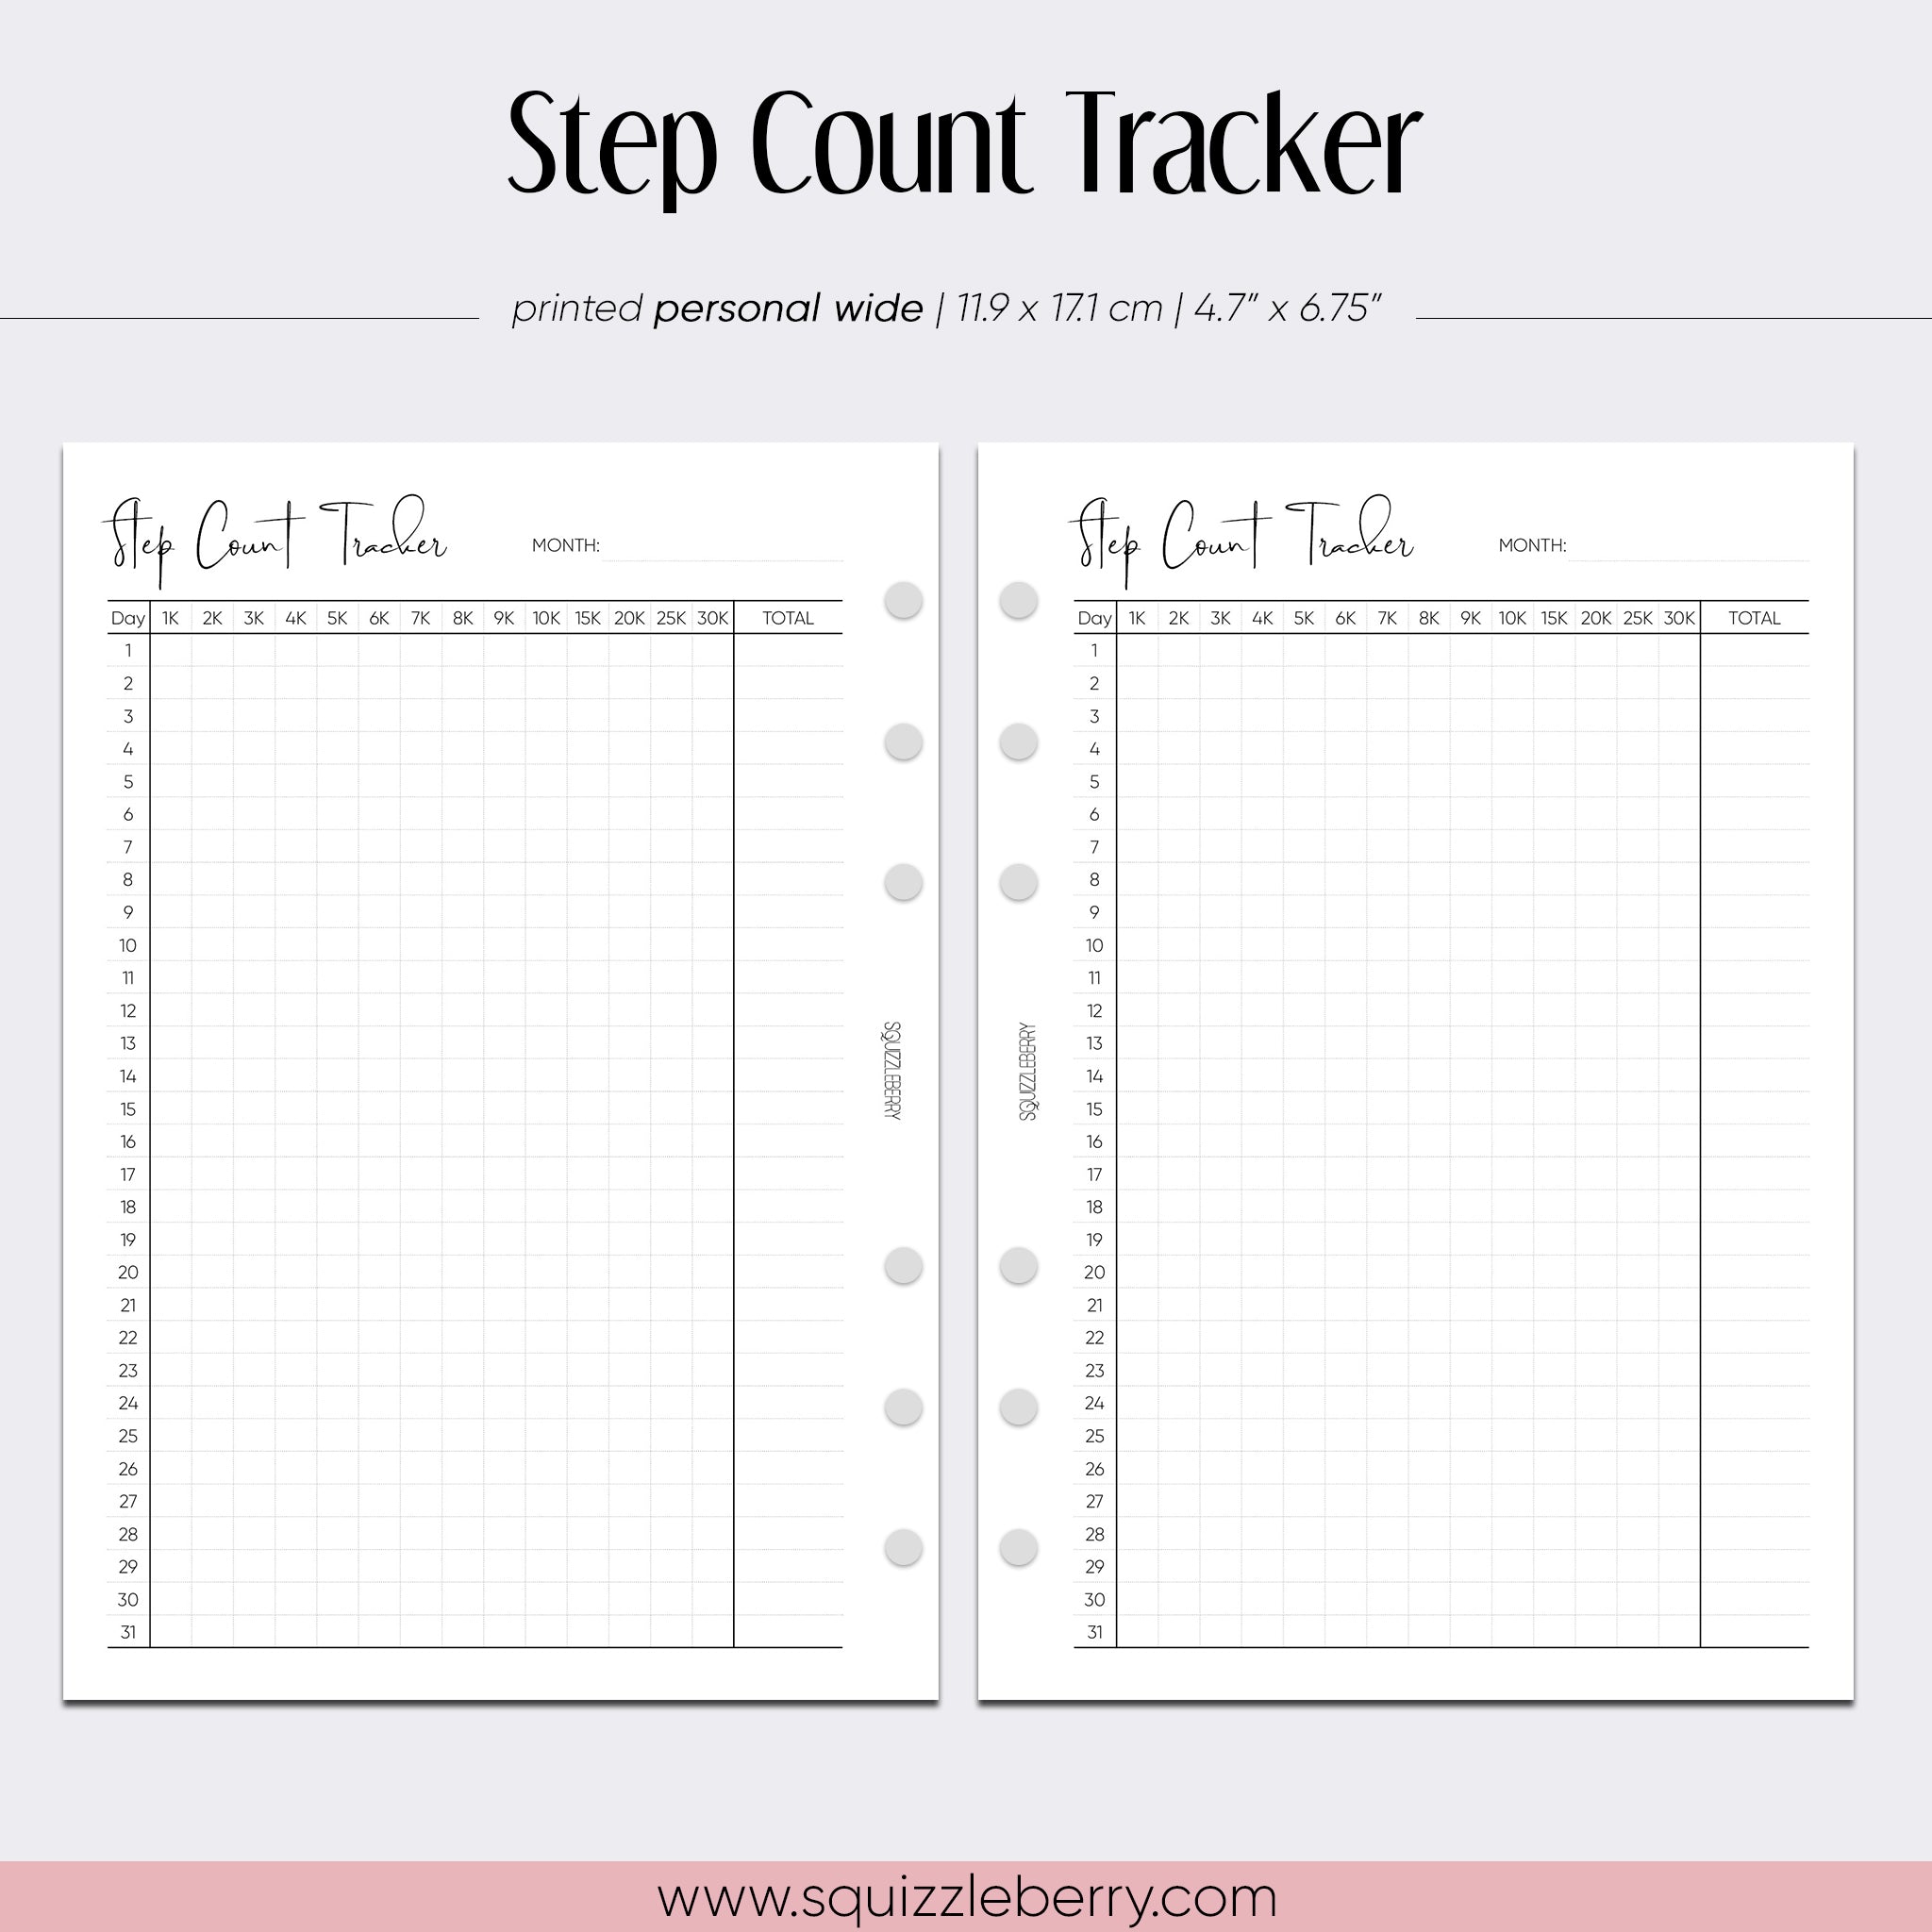 Step Count Tracker - Personal Wide | SquizzleBerry